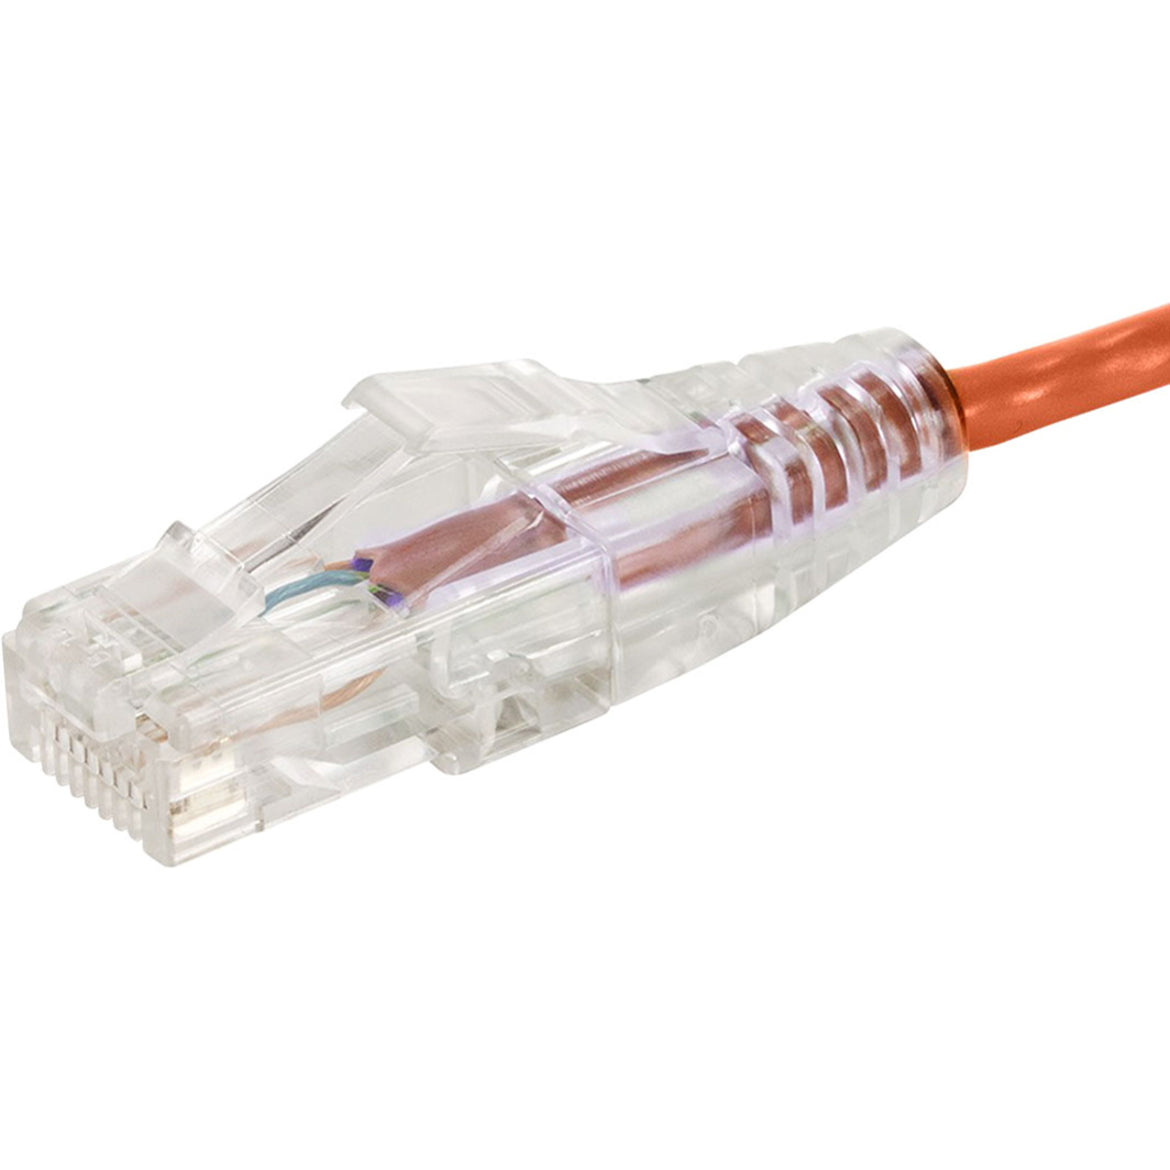 Monoprice 14794 SlimRun Cat6 1ft Orange Ethernet Network Cable, Flexible and Booted